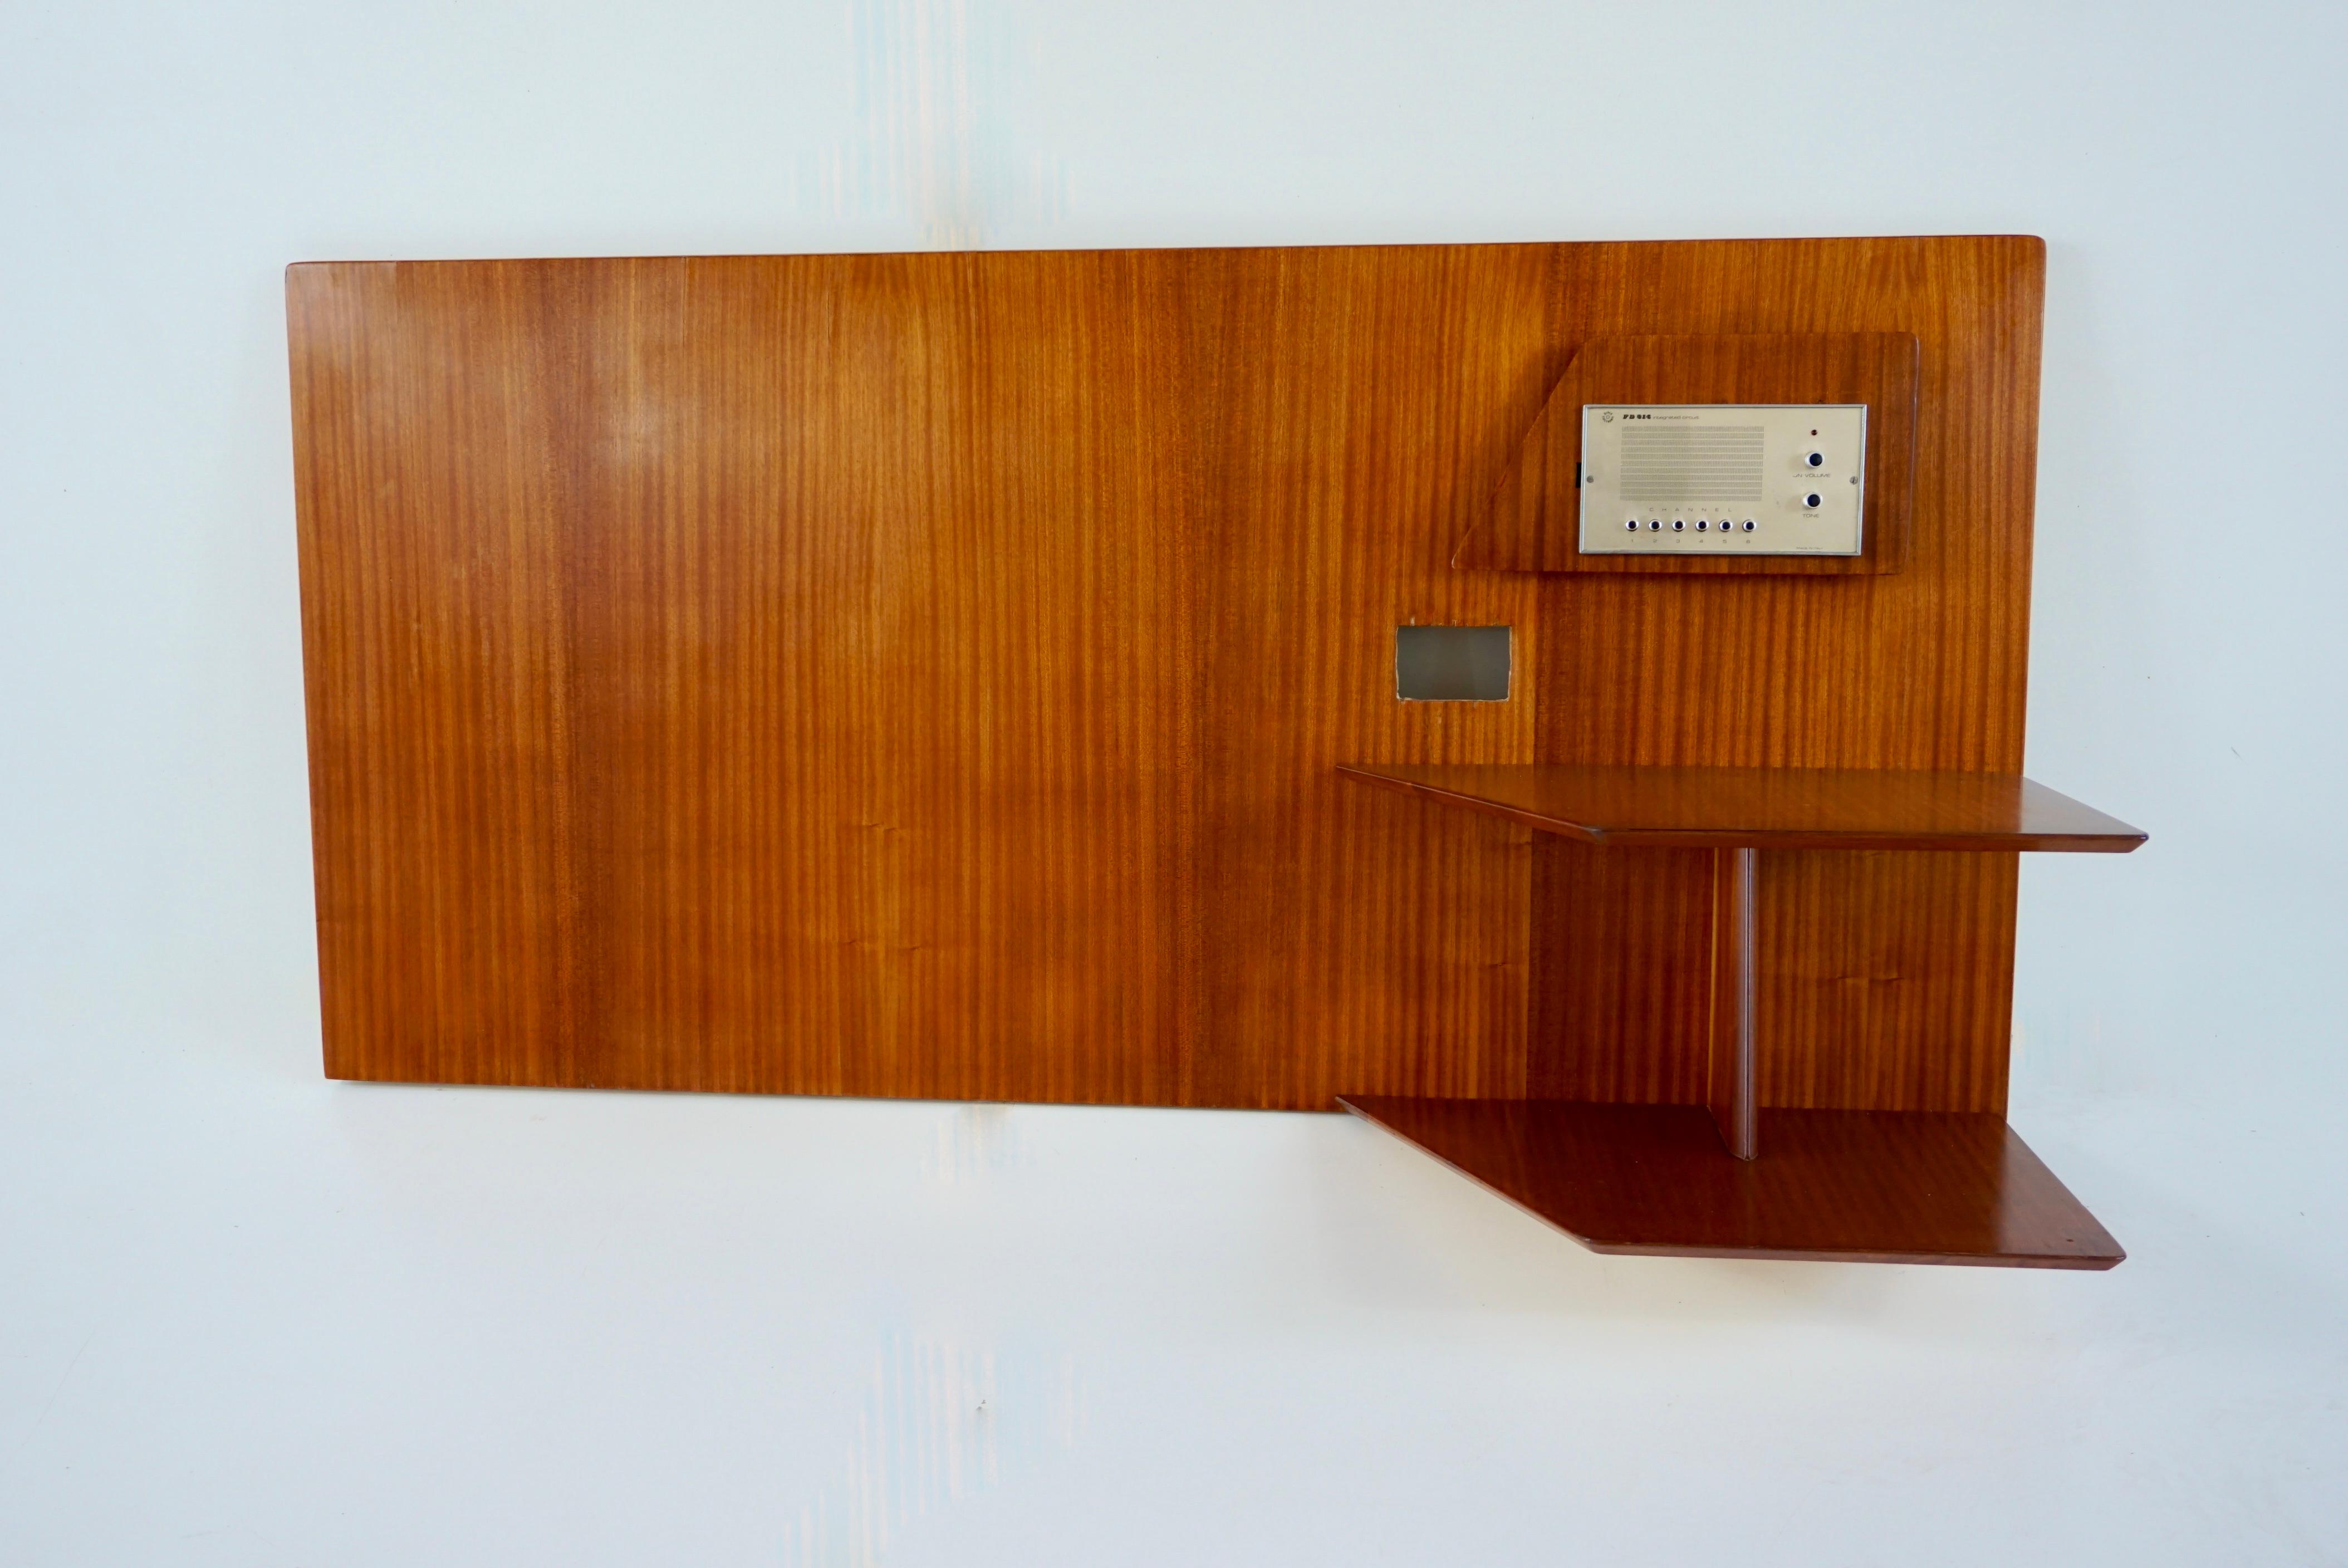 a single  left headboard by Gio Ponti from the furniture of the Hotel Royal in Naples, 1955.
Manufactured by Giordano Chiesa by Dassi.
dark honey wood  
two tiered shelving, magazine rack, space for lighting switch 
Good condition. Original patina,